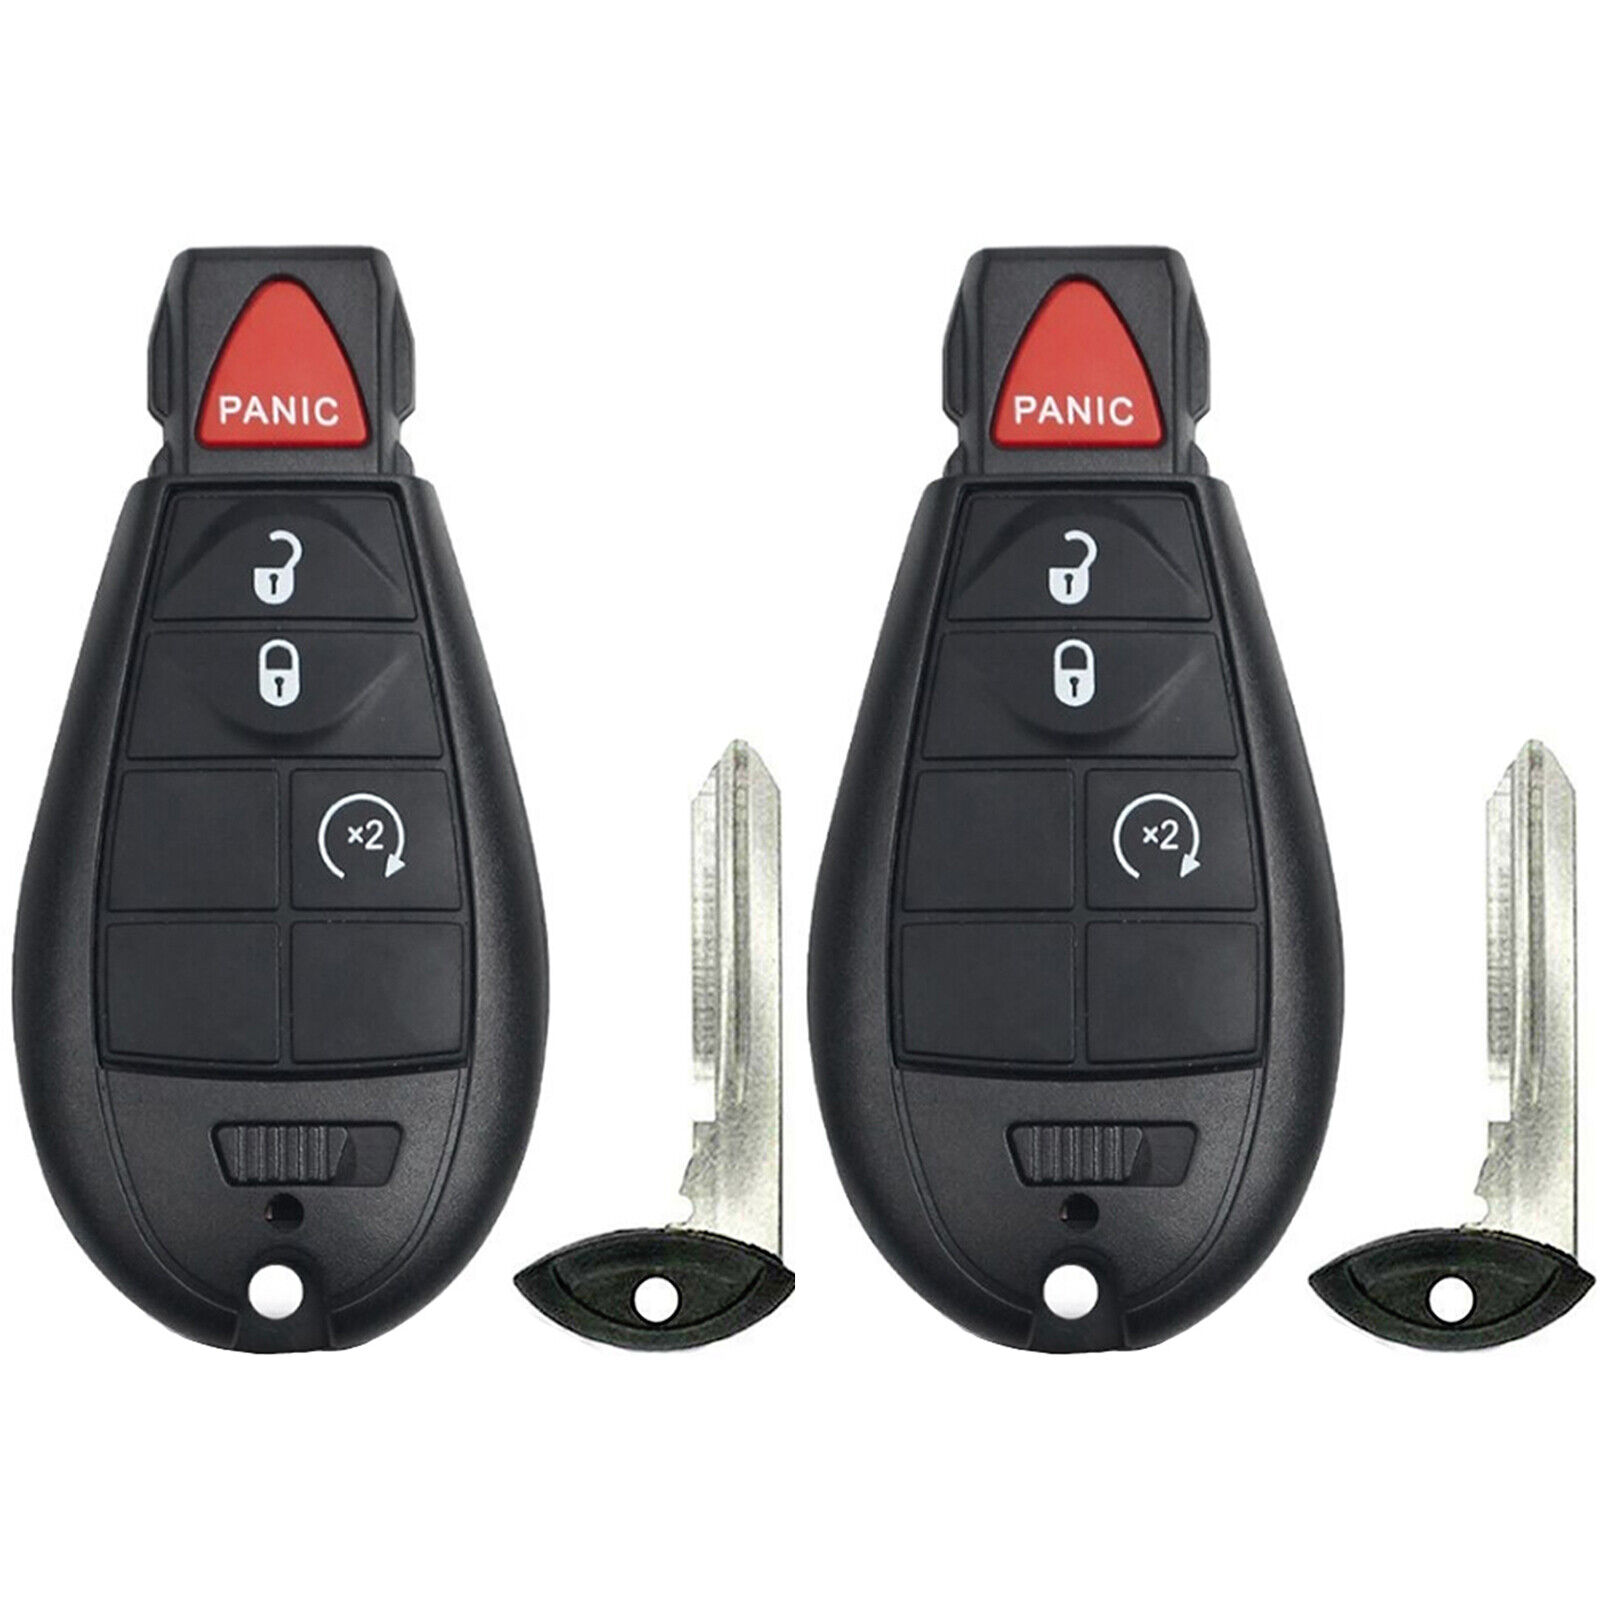 2x New Replacement Keyless Entry Remote Control Key Fob For Dodge Caravan RAM